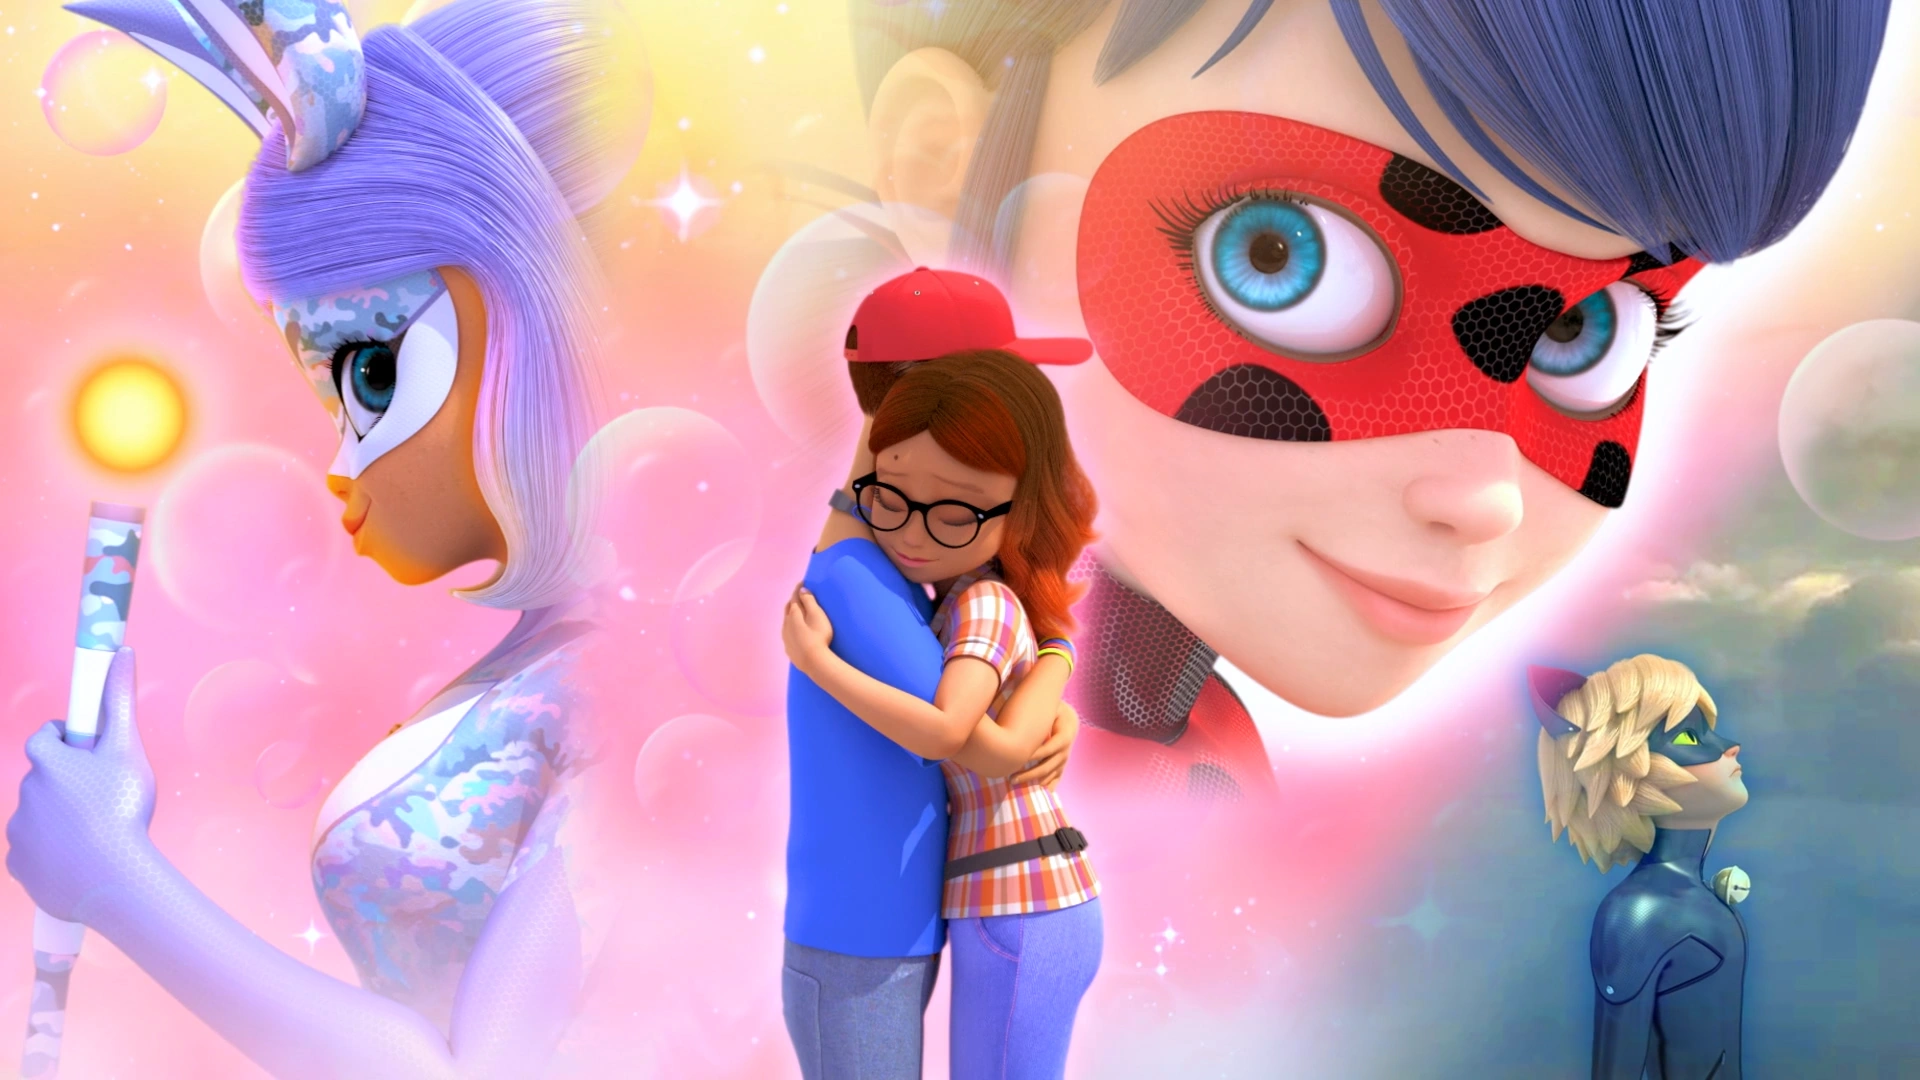 This wiki is about Miraculous: Tales of Ladybug & Cat Noir, the CGI sup...